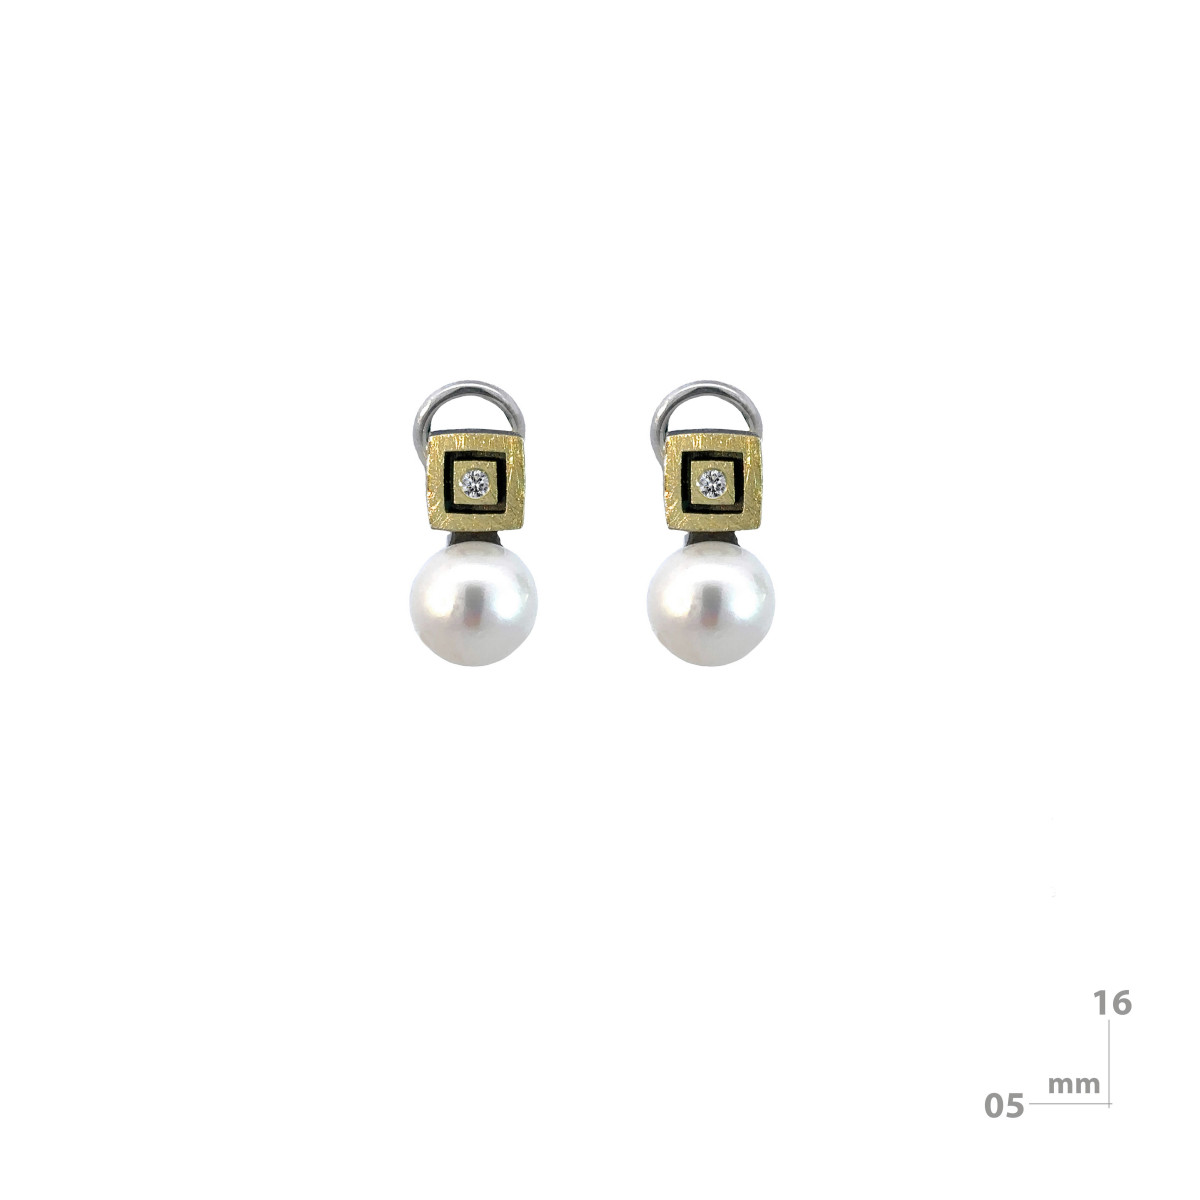 Silver, gold, shiny and pearl earrings